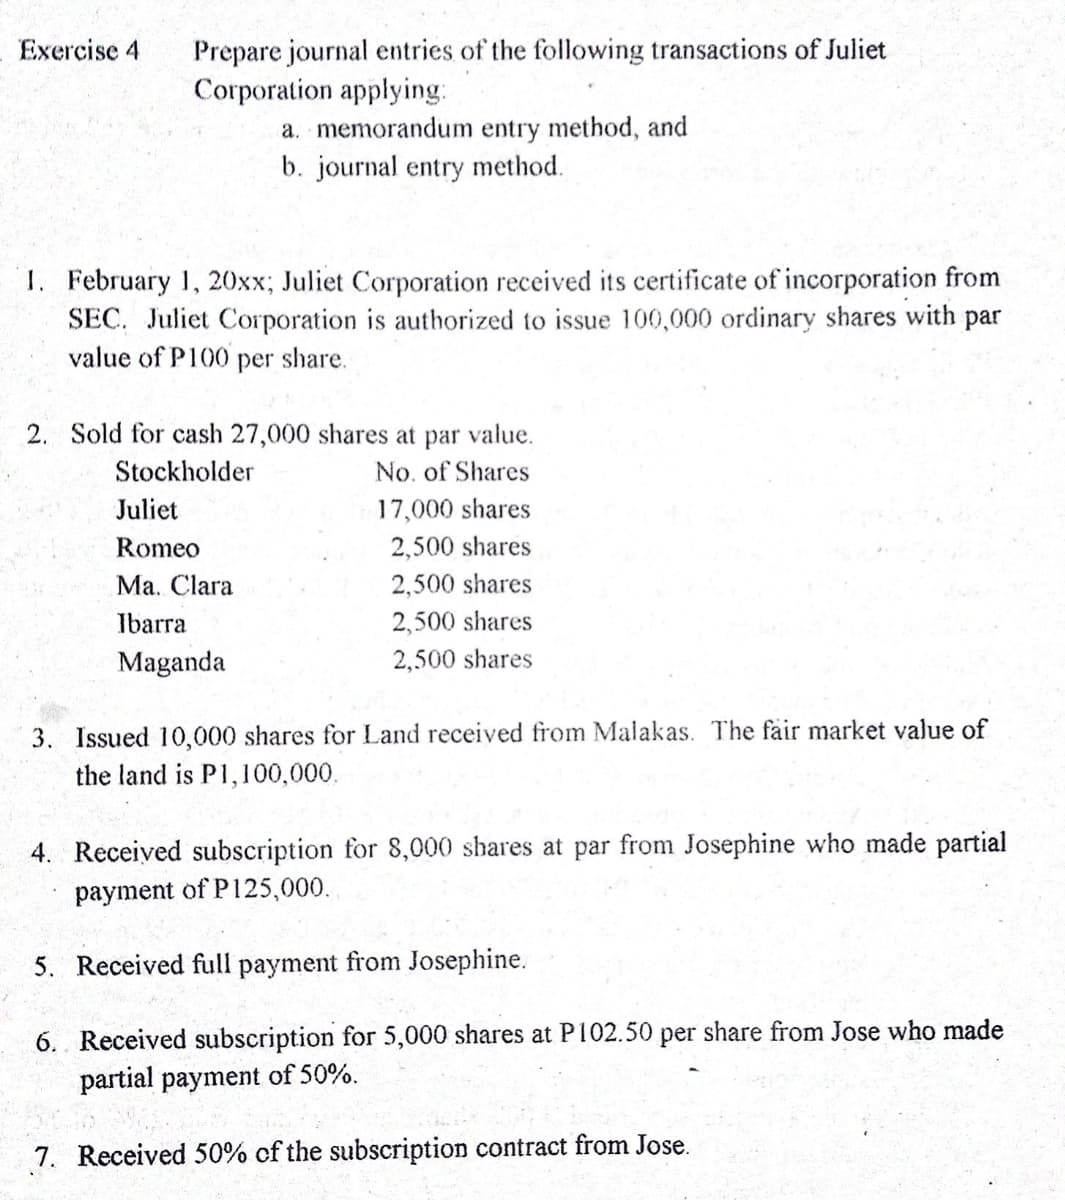 Prepare journal entries of the following transactions of Juliet
Corporation applying:
Exercise 4
a. memorandum entry method, and
b. journal entry method.
1. February 1, 20xx; Juliet Corporation received its certificate of incorporation from
SEC. Juliet Corporation is authorized to issue 100,000 ordinary shares with par
value of P100
per
share.
2. Sold for cash 27,000 shares at par
value.
Stockholder
No. of Shares
Juliet
17,000 shares
Romeo
2,500 shares
Ma. Clara
2,500 shares
Ibarra
2,500 shares
Maganda
2,500 shares
3. Issued 10,000 shares for Land received from Malakas. The fair market value of
the land is P1,100,000.
4. Received subscription for 8,000 shares at par from Josephine who made partial
payment of P125,000.
5. Received full payment from Josephine.
6. Received subscription for 5,000 shares at P102.50 per share from Jose who made
partial payment of 50%.
7. Received 50% of the subscription contract from Jose.
